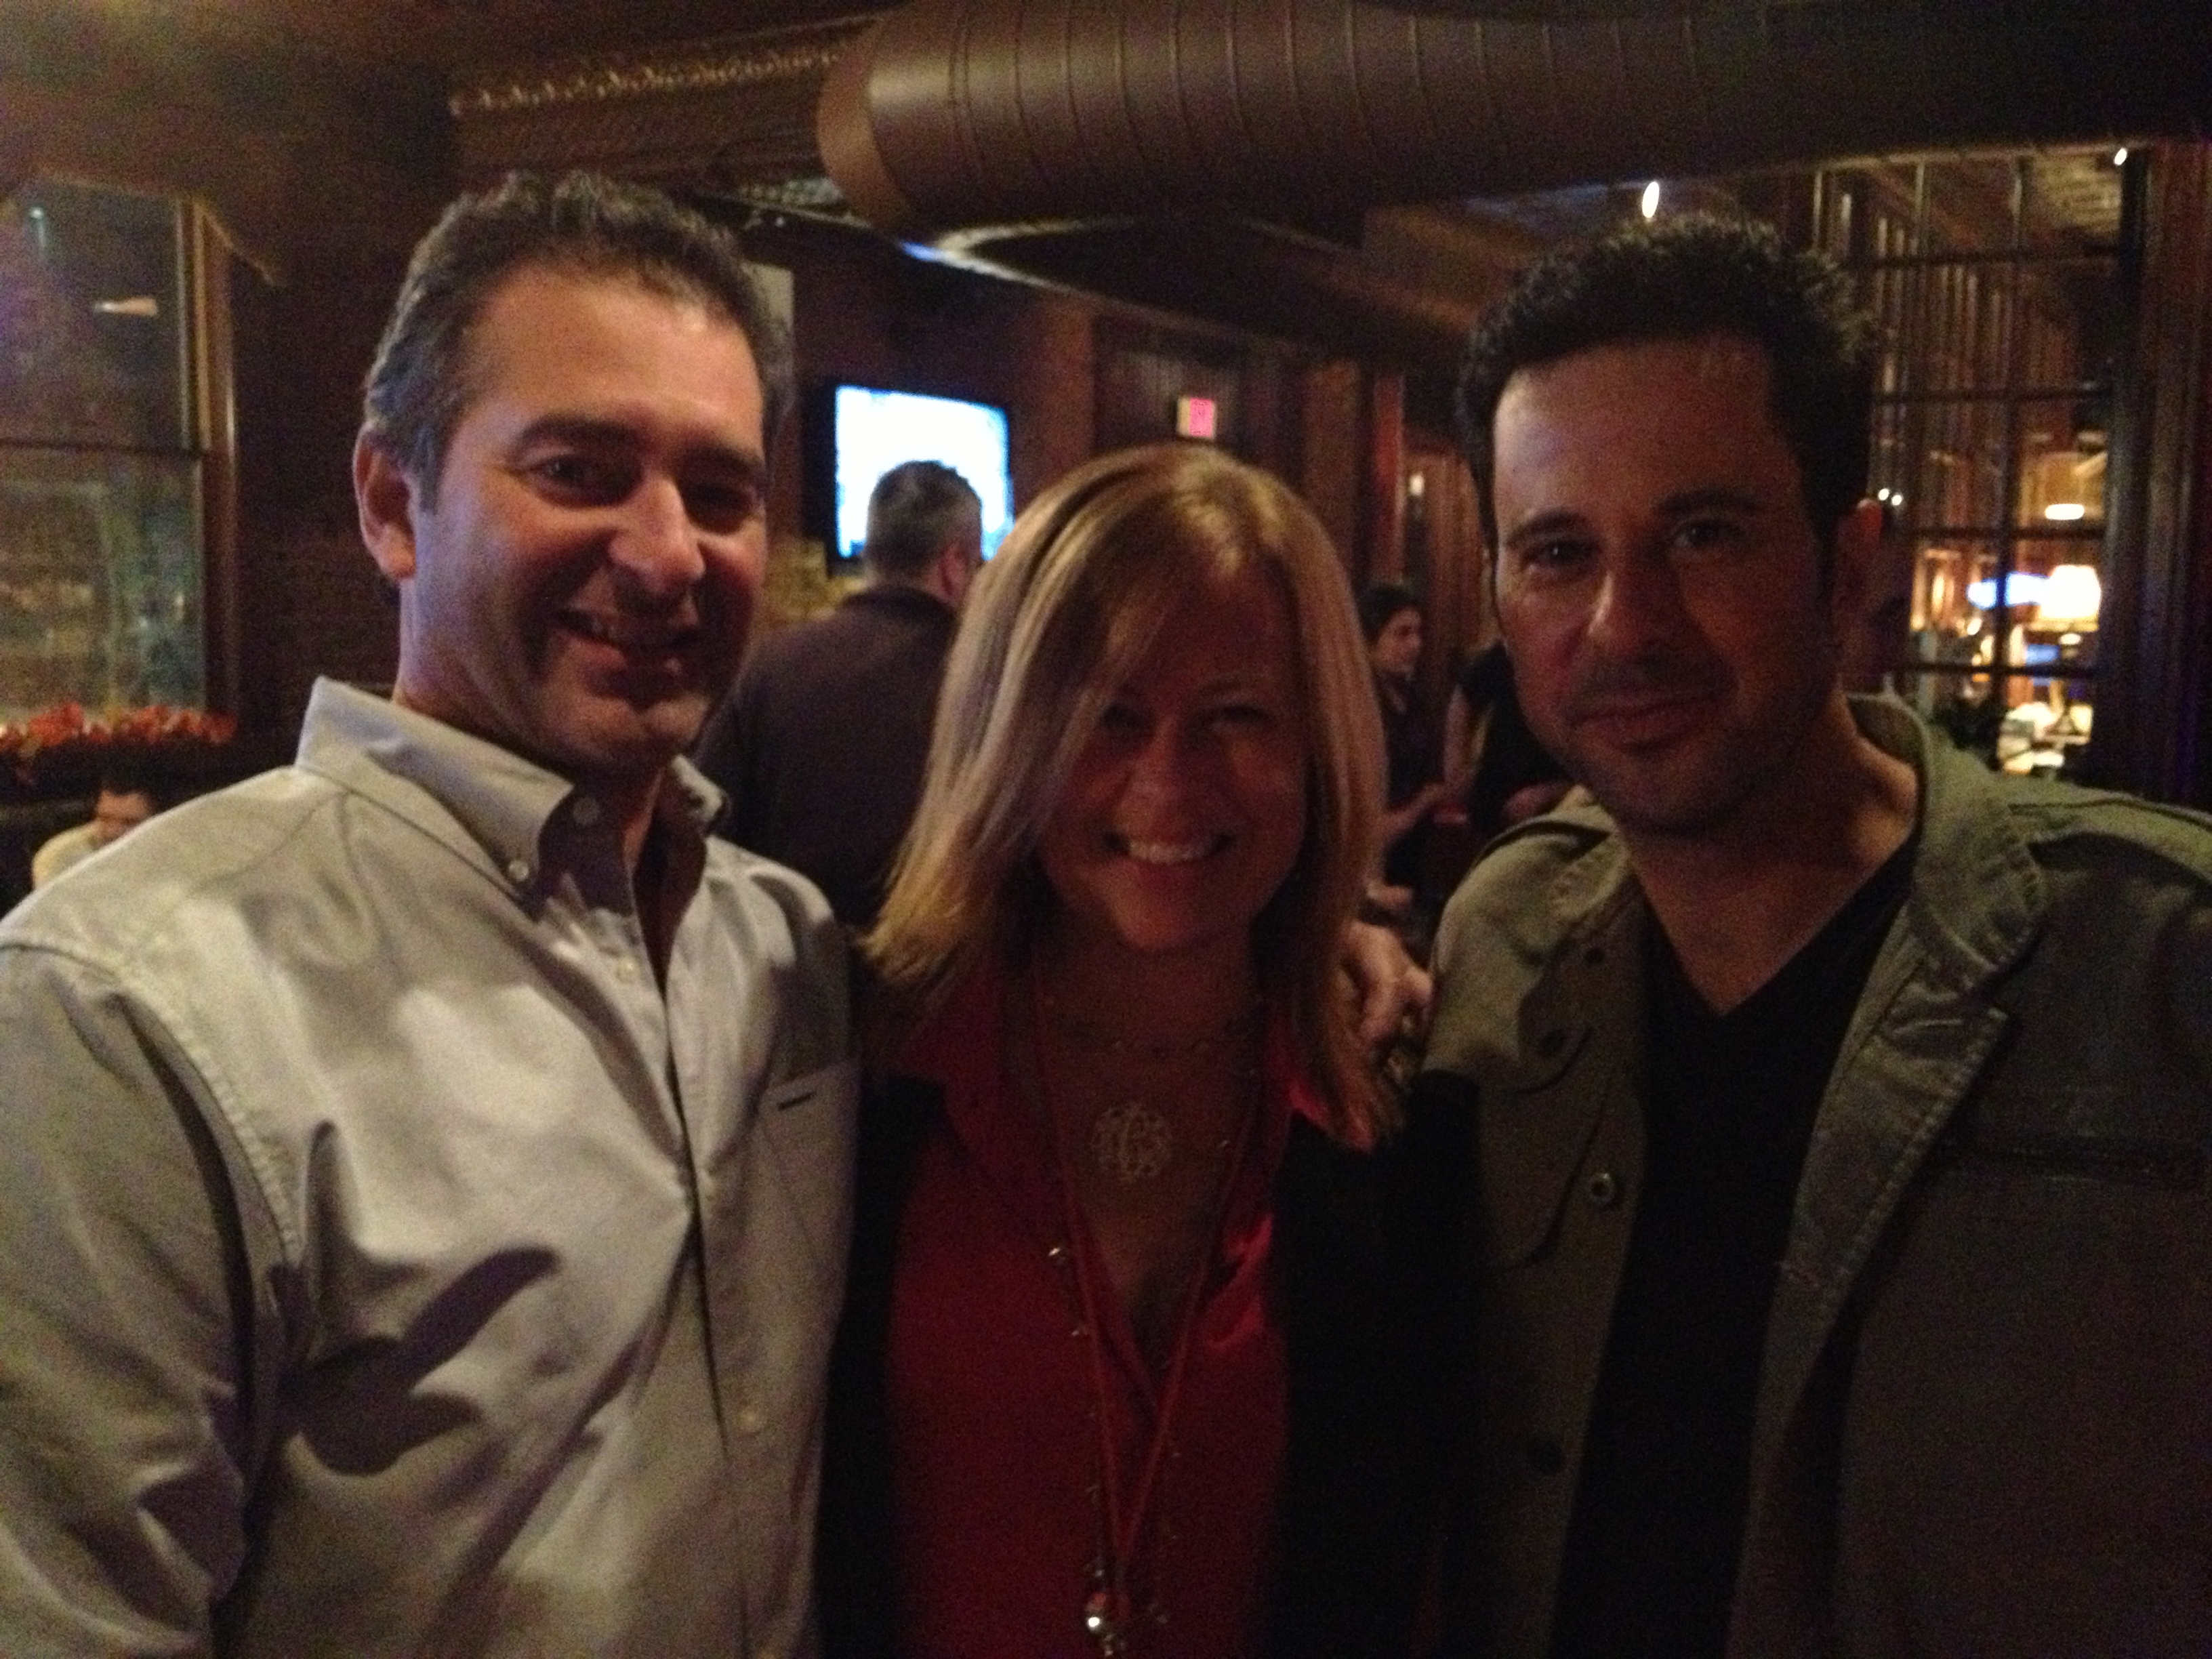 with producer Chad A Verdi and actor/director Jonathan Silverman